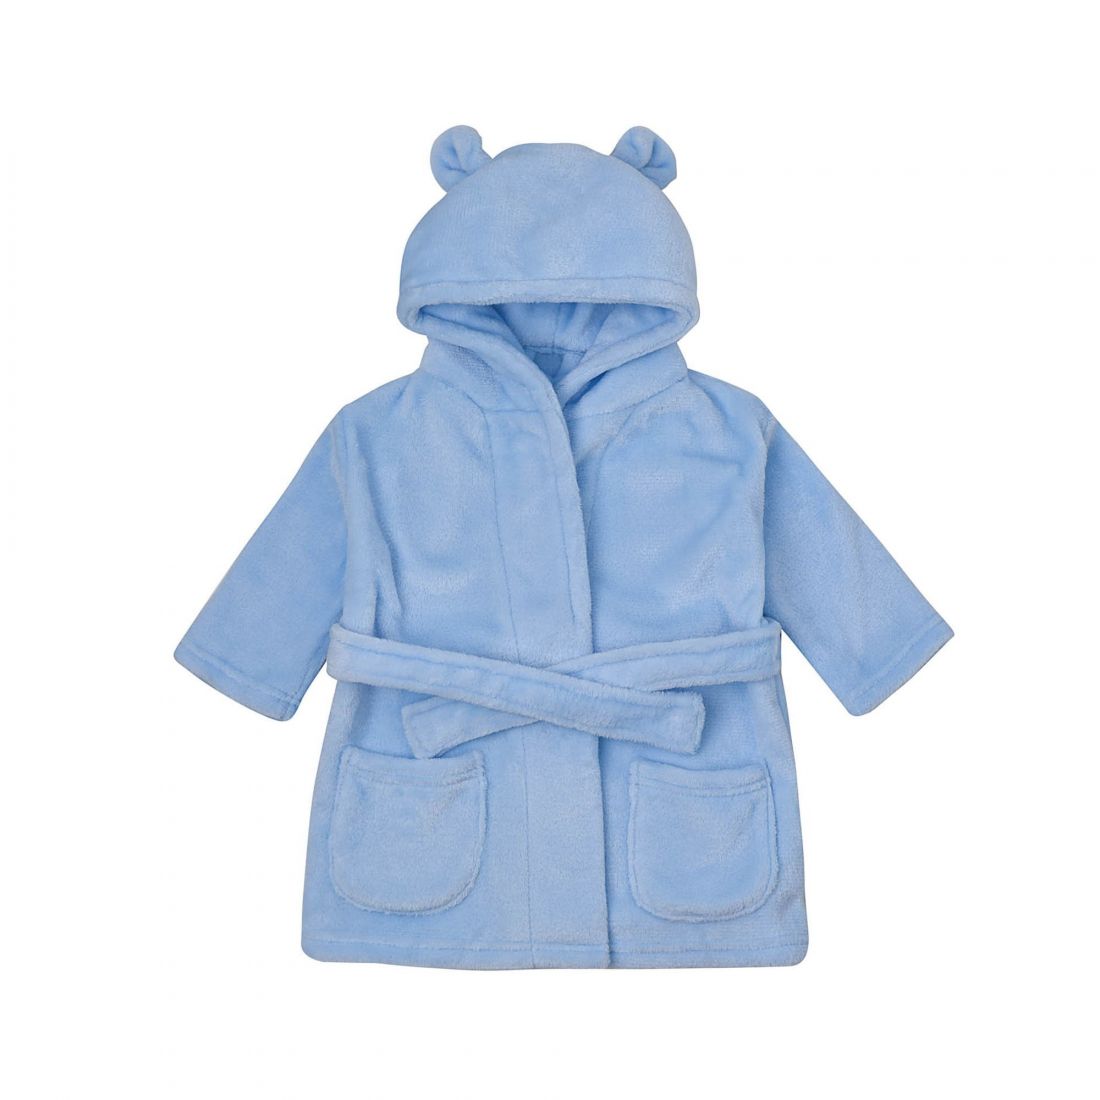  Bambino Babys First Dressing Gown - Blue 3-6 Months